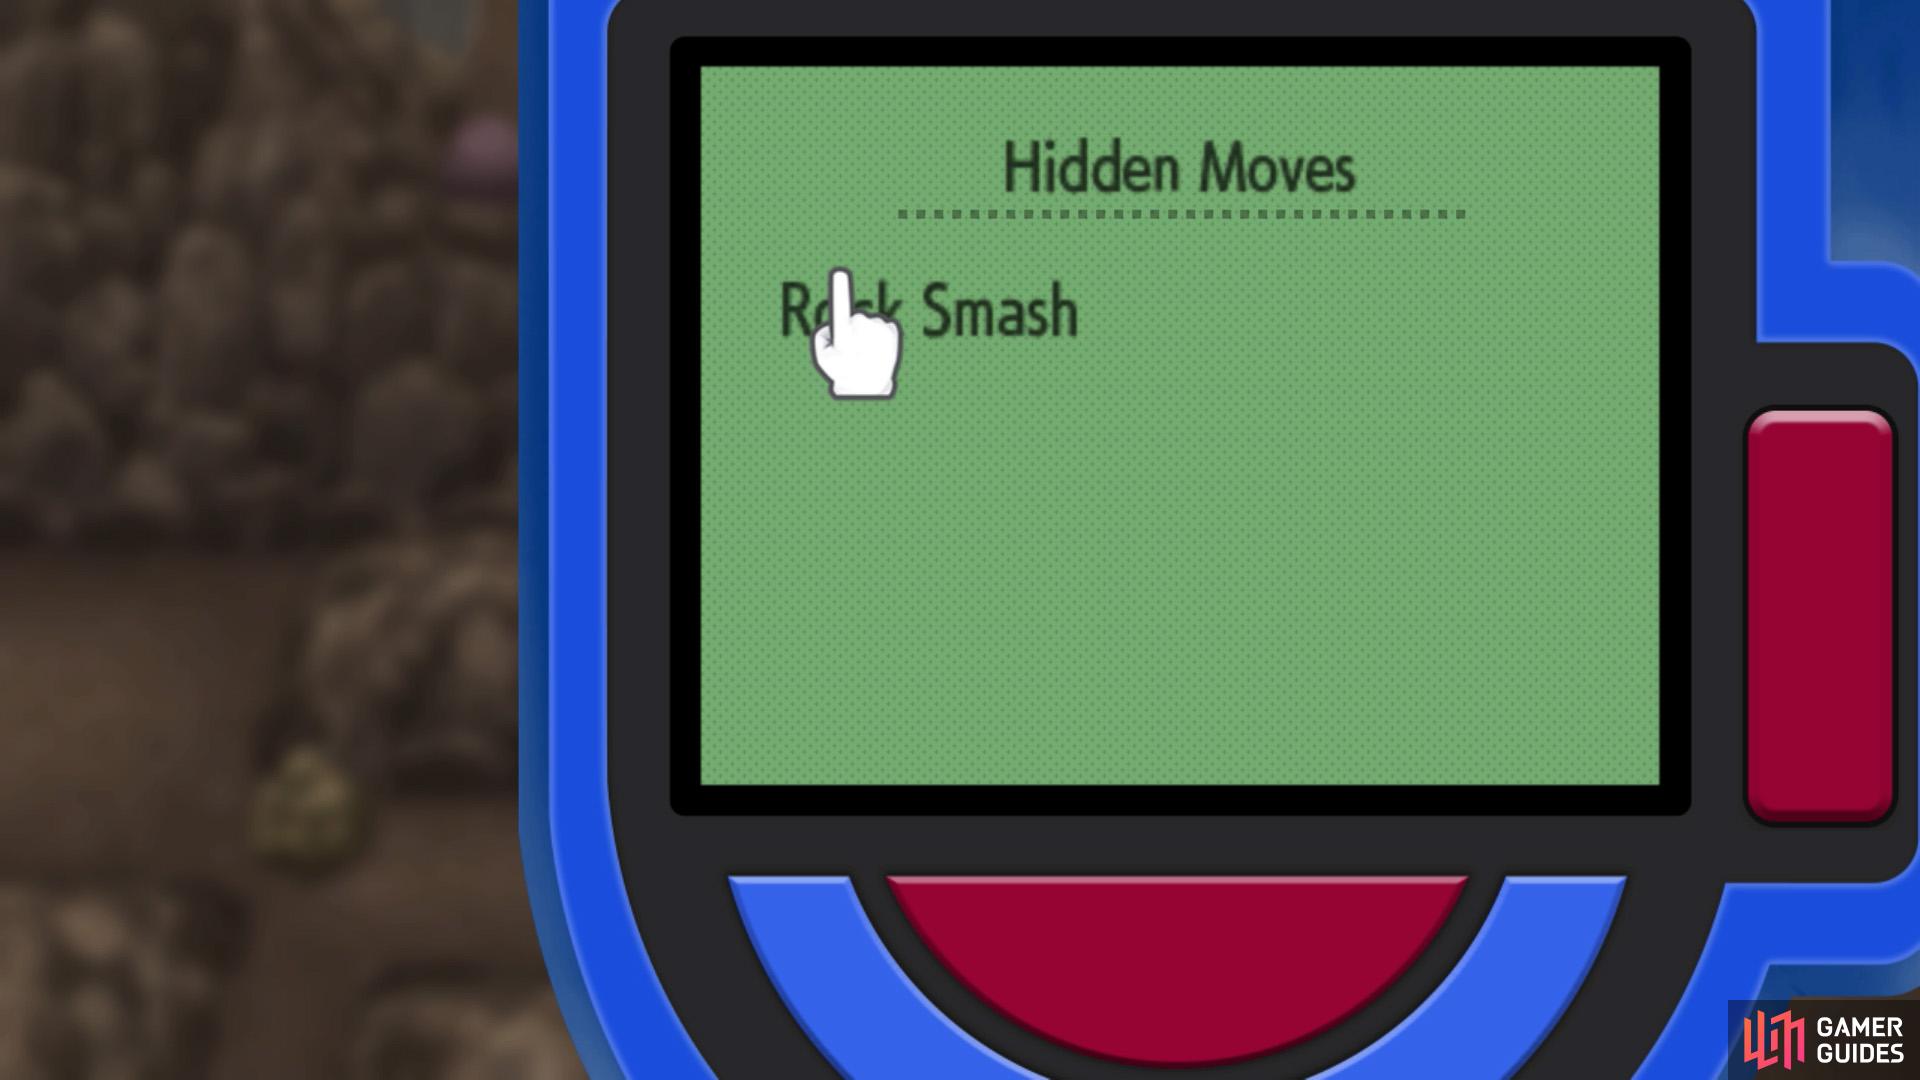 You can also manually select "Rock Smash" from the Hidden Moves app.